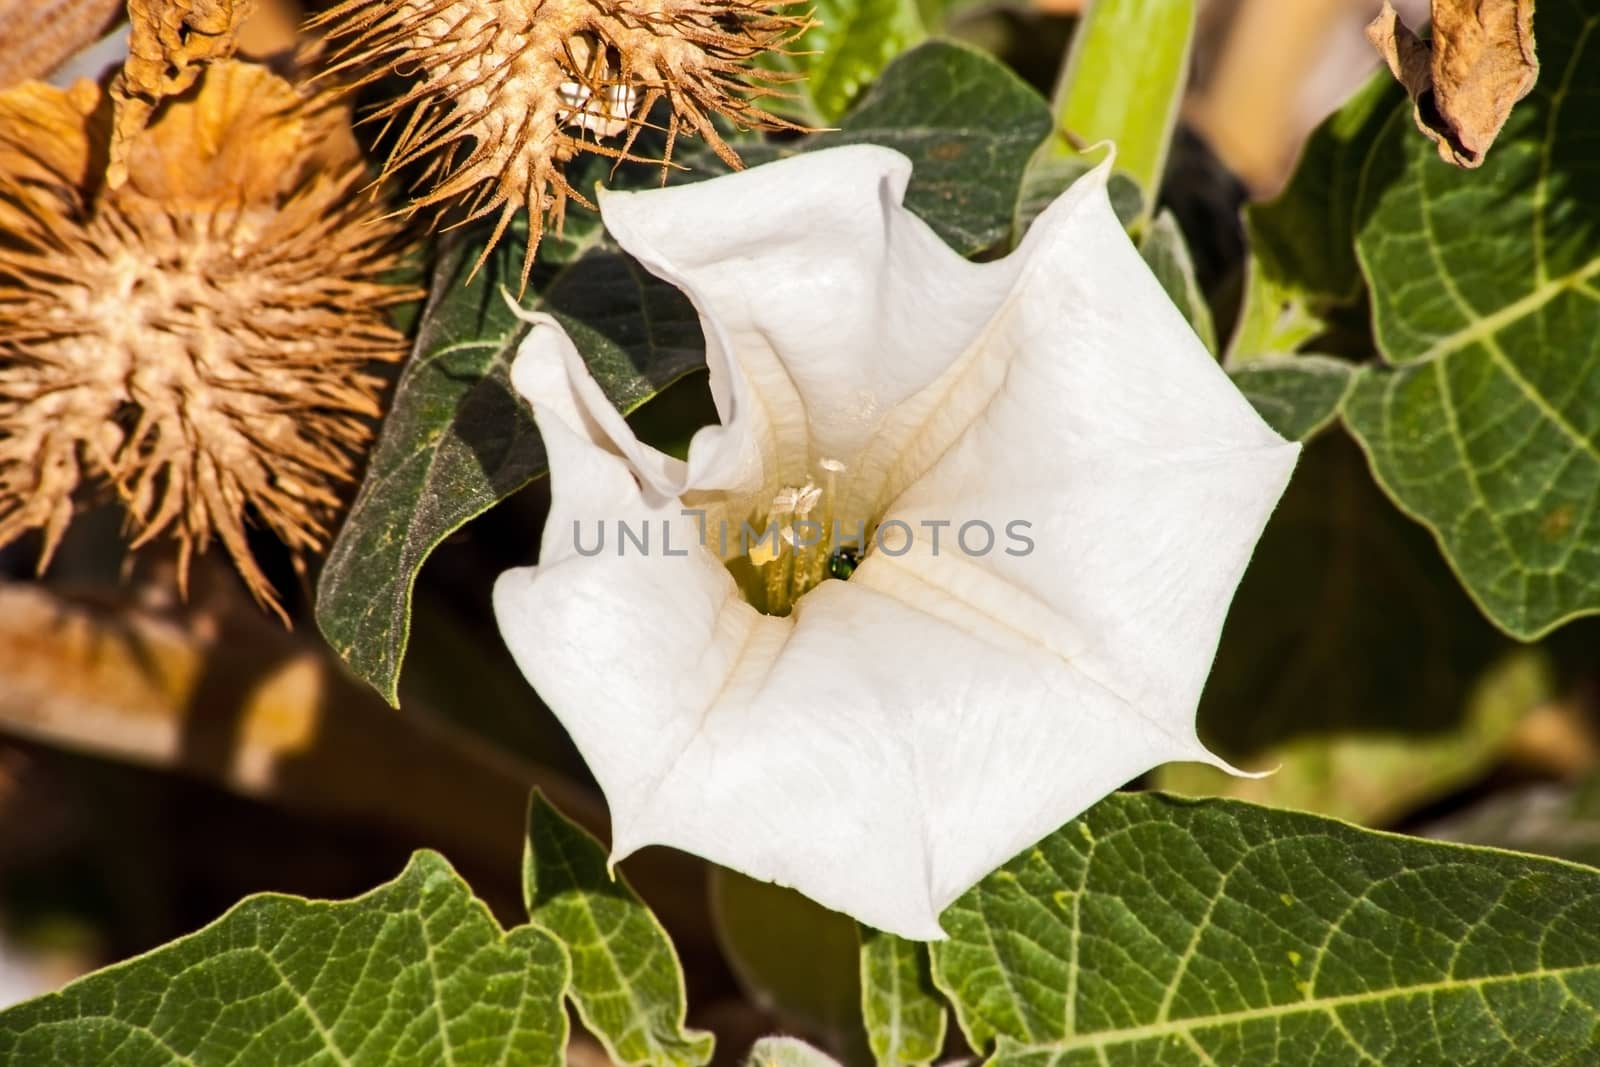 The Jimsonweed (Datura innoxia) originates from the South Western USA and Central America, but has spread widely as an invasive plant. It is known for it's deliriant properties.